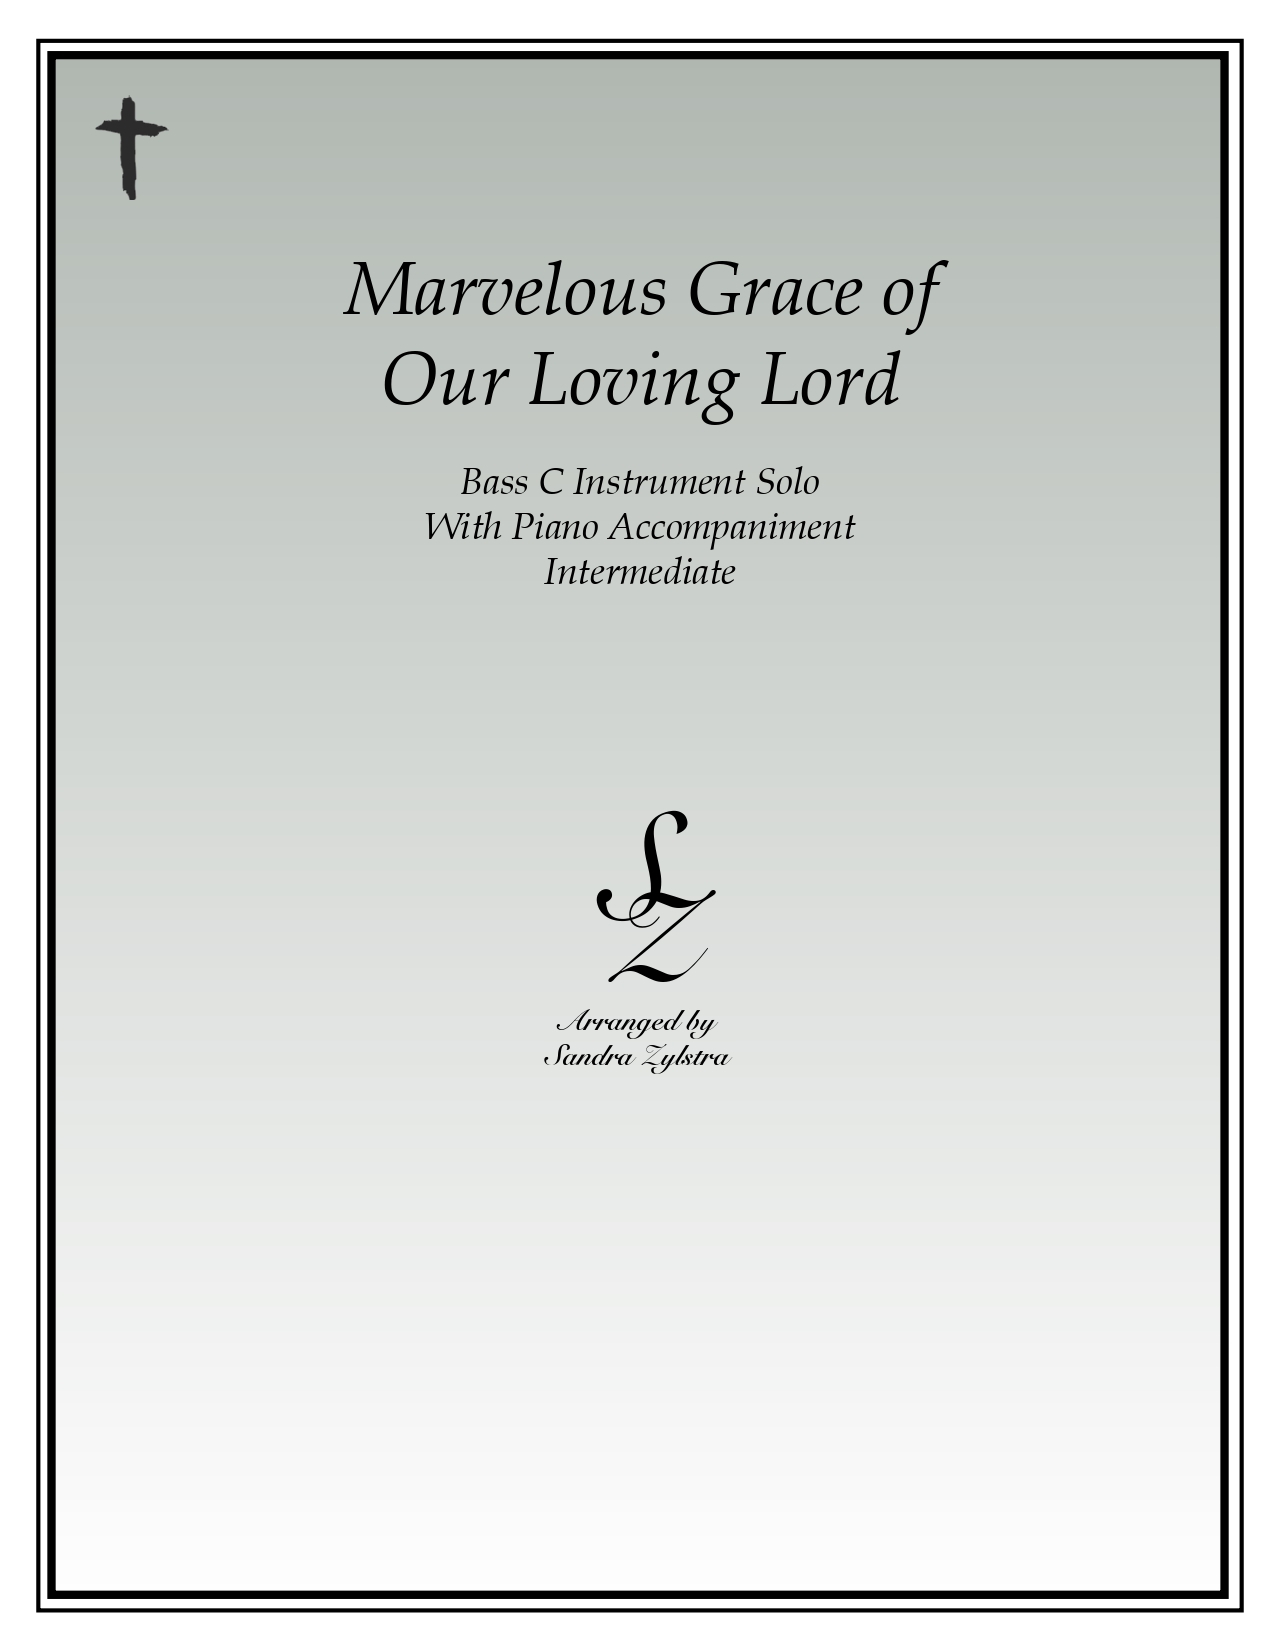 Marvelous Grace Of Our Loving Lord bass C instrument solo part cover page 00011